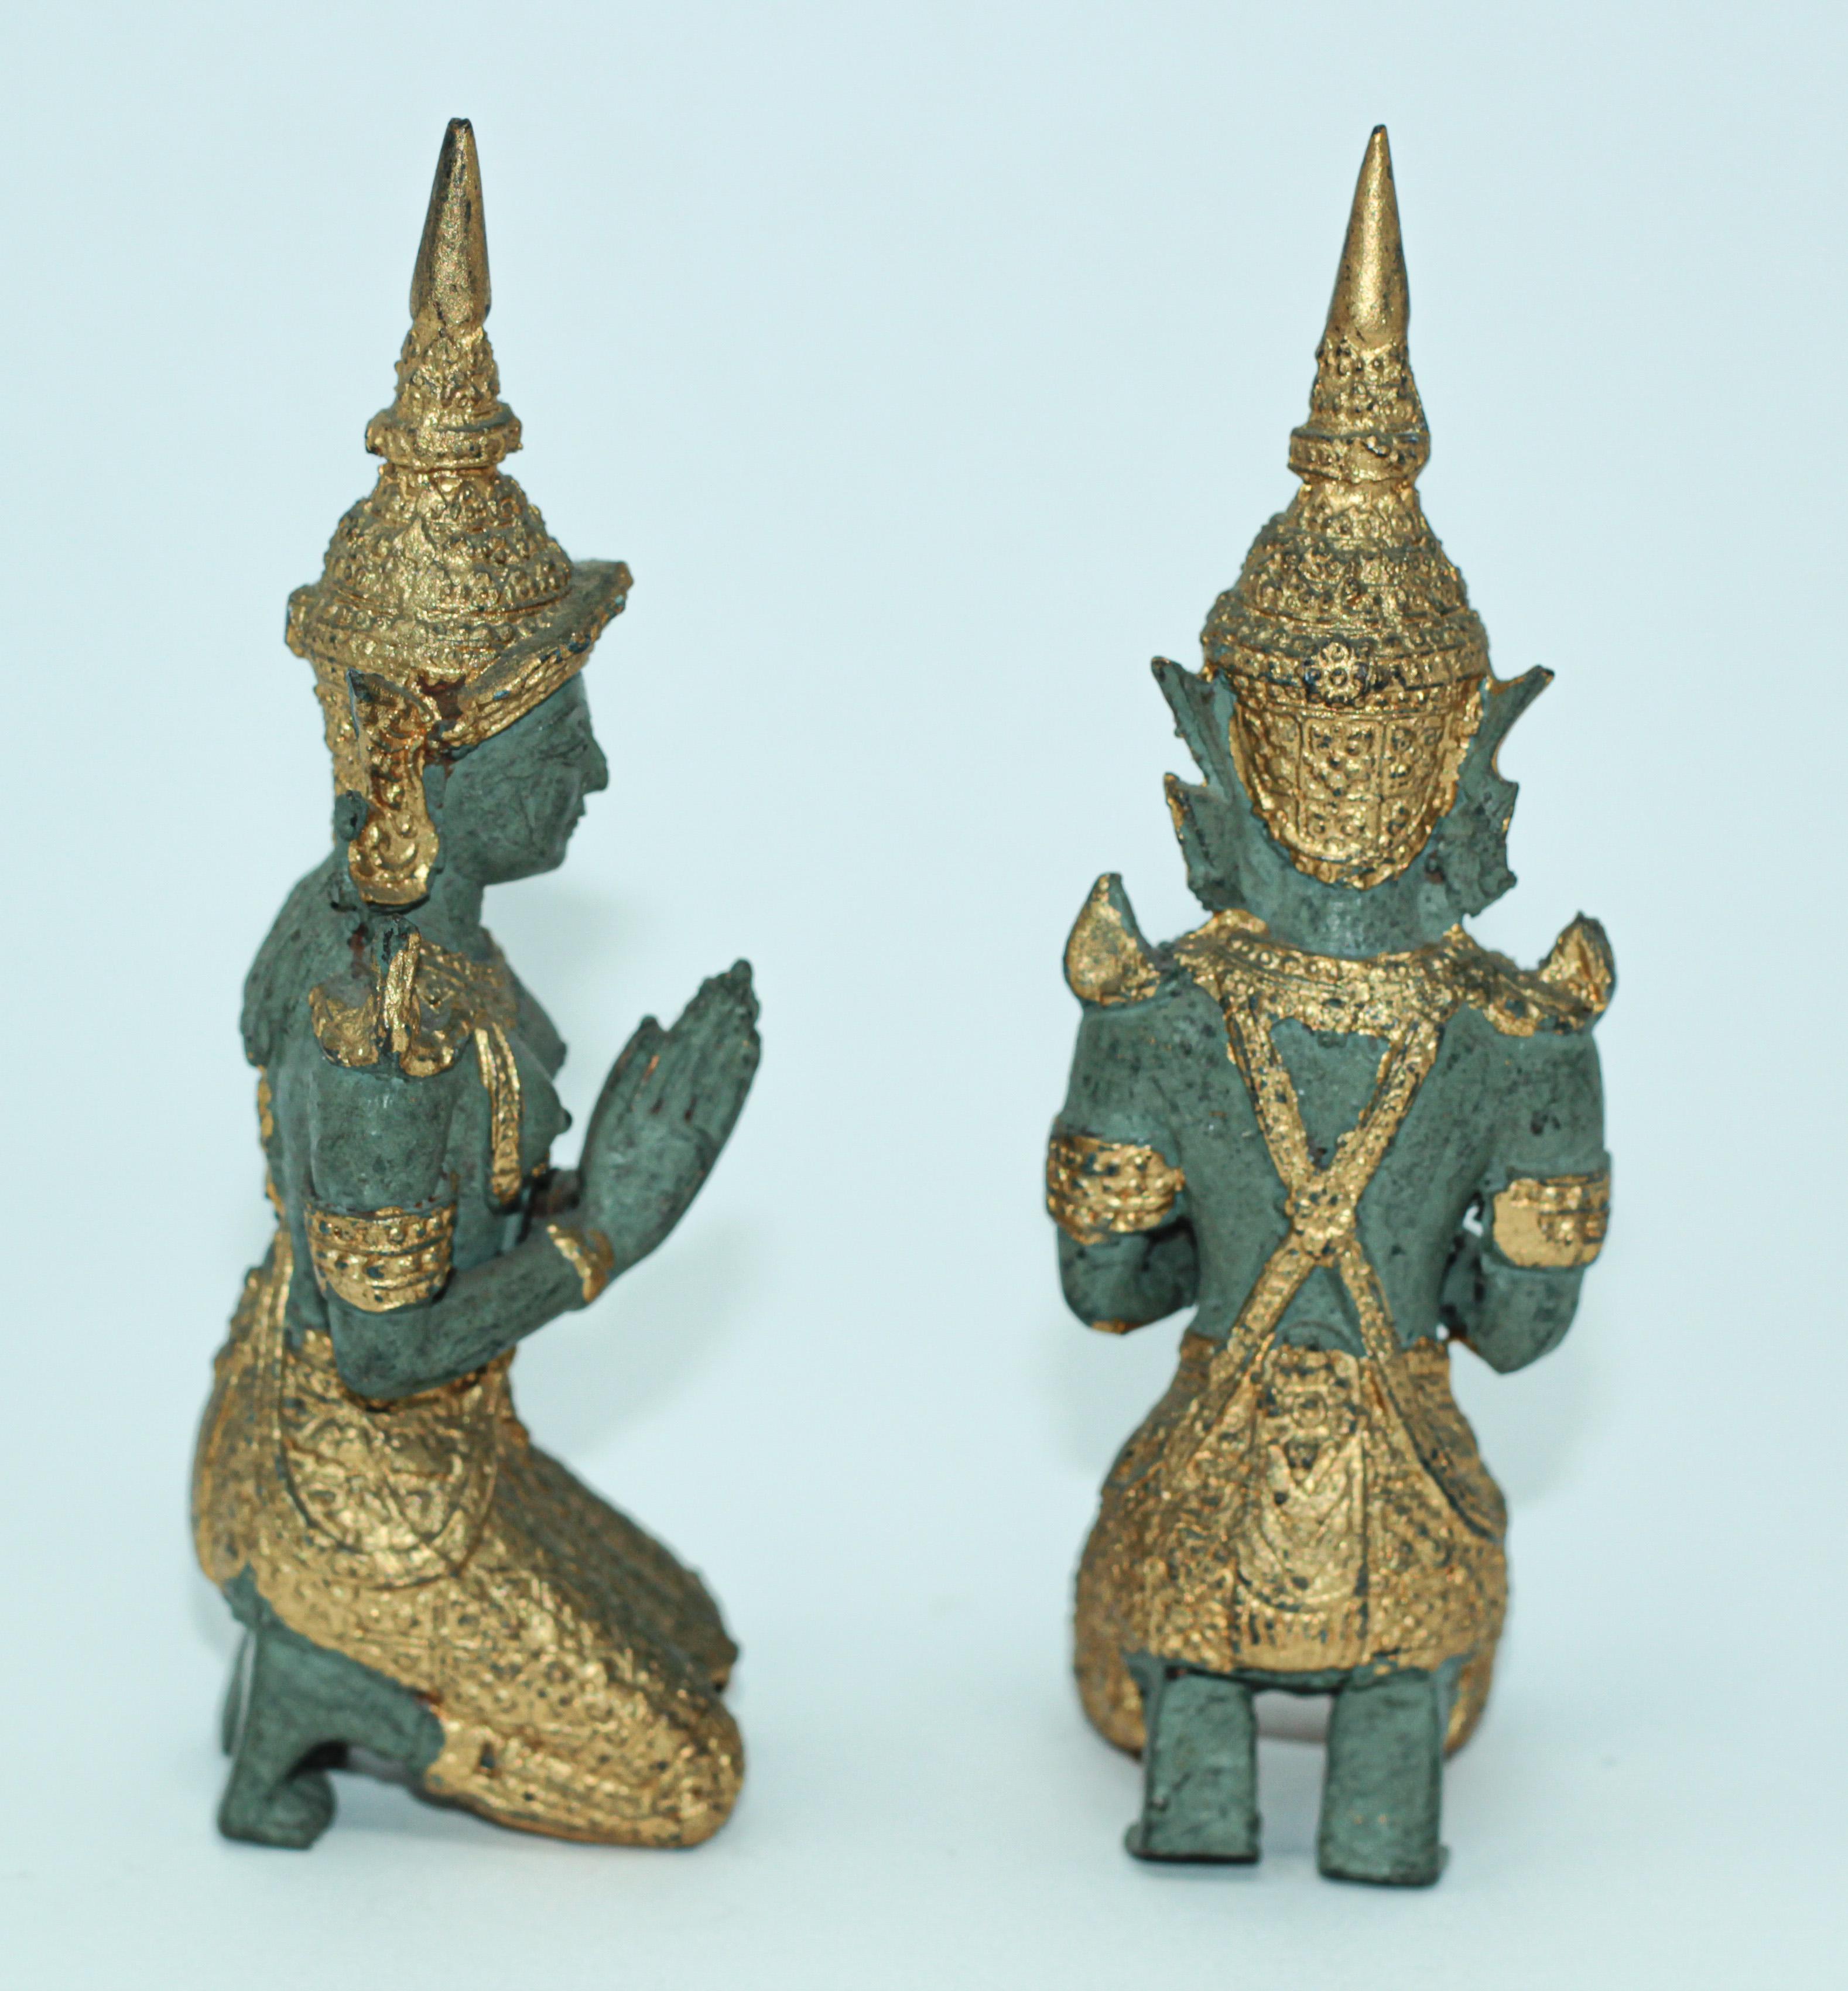 Small gilt Kneeling Thai Buddhist gatekeeper male and female angels kneeling praying.
Intricate Asian bronze Thai Teppanom kneeling Angels Buddha statues in black with the ceremonial costumes and the jewelry adorned with gold leaf